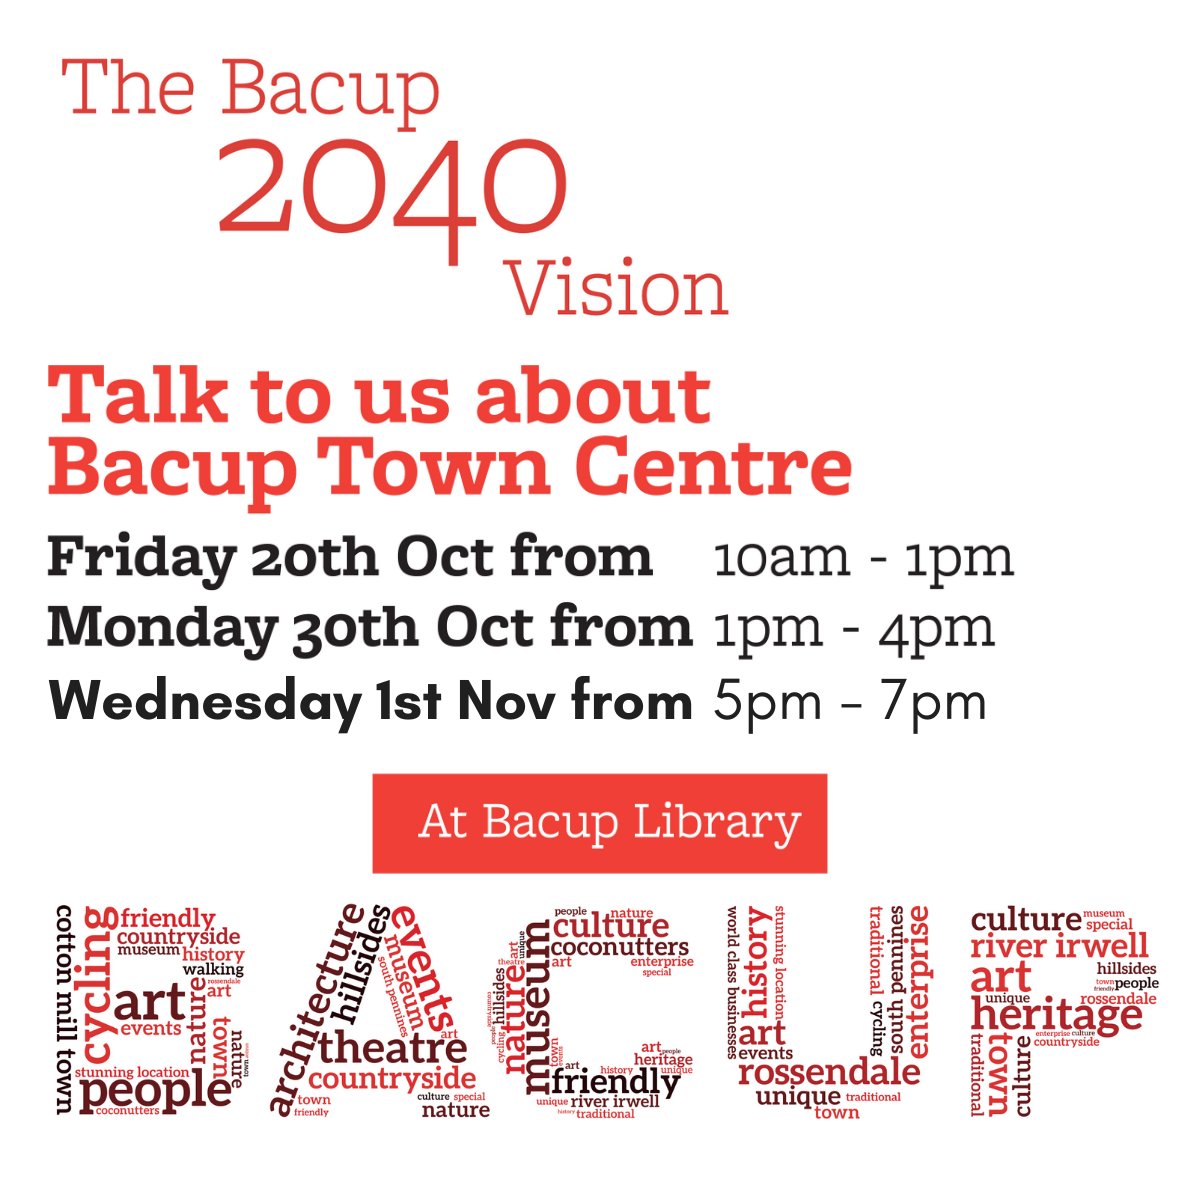 Exciting developments are coming to Bacup Market & your opinion counts! Come & talk to us at Bacup Library: -Fri 20 Oct from 10am-1pm -Mon 30 Oct from 1pm-4pm -Weds 1 Nov from 5pm-7pm Participate in our survey and be a part of the transformation: bit.ly/BacupMarketSur…